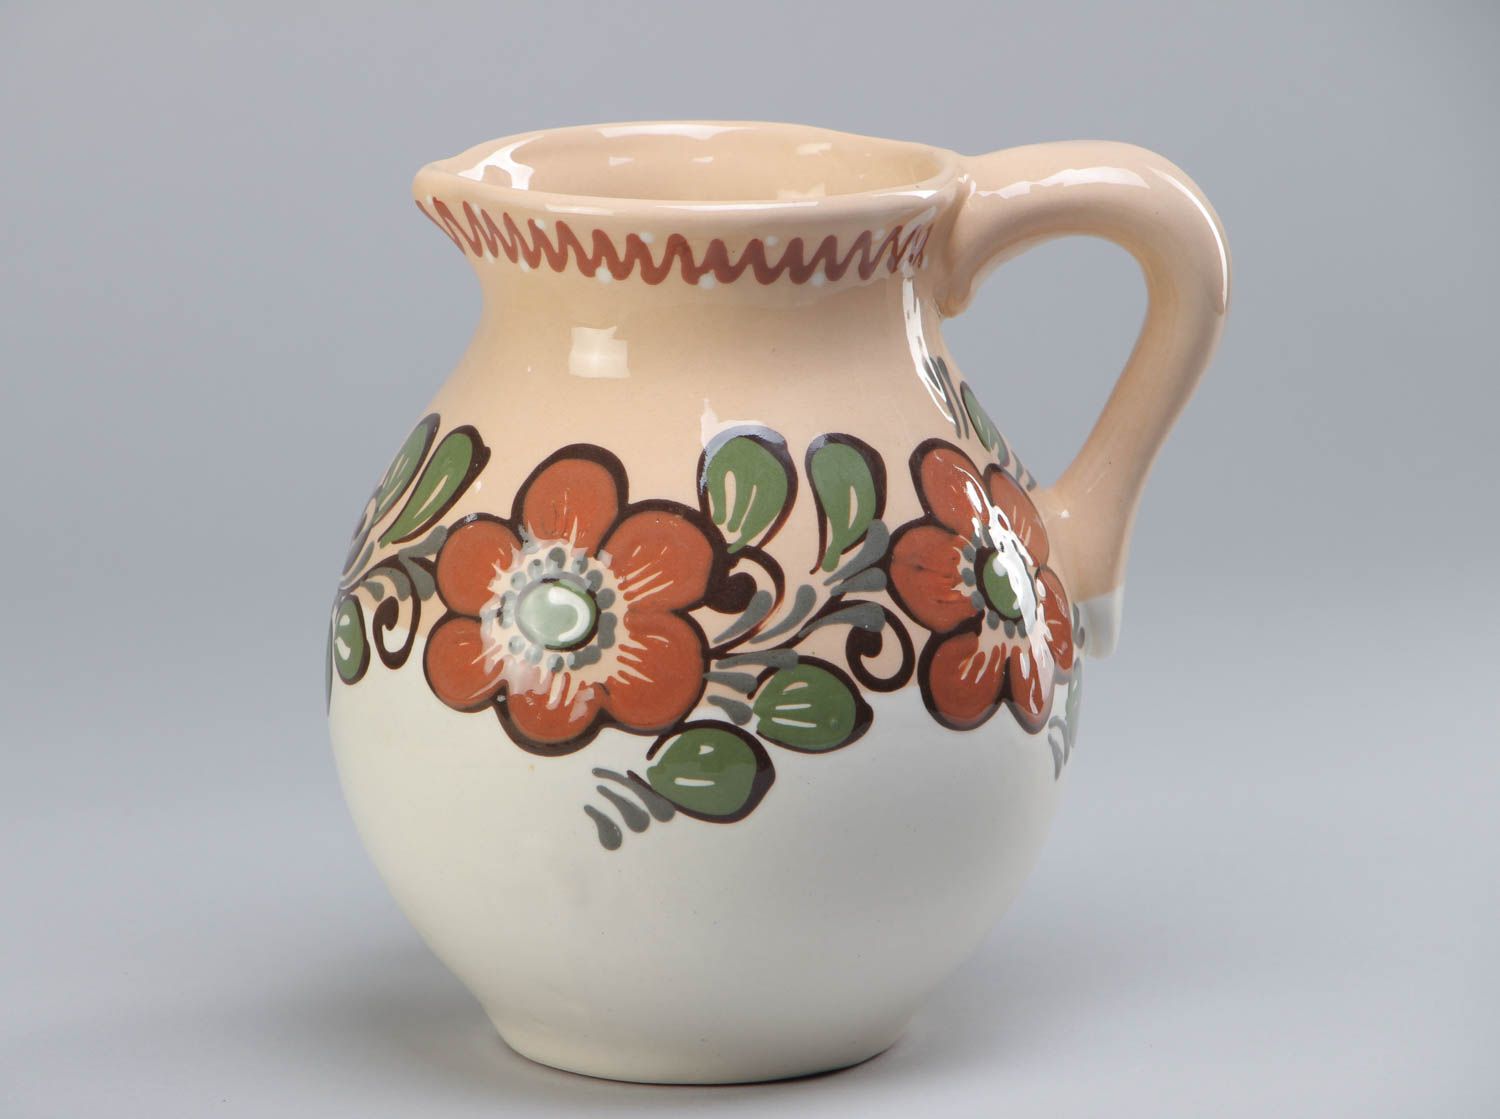 90 oz ceramic white glazed pitcher jug with hand-painted floral picture 2 lb photo 2